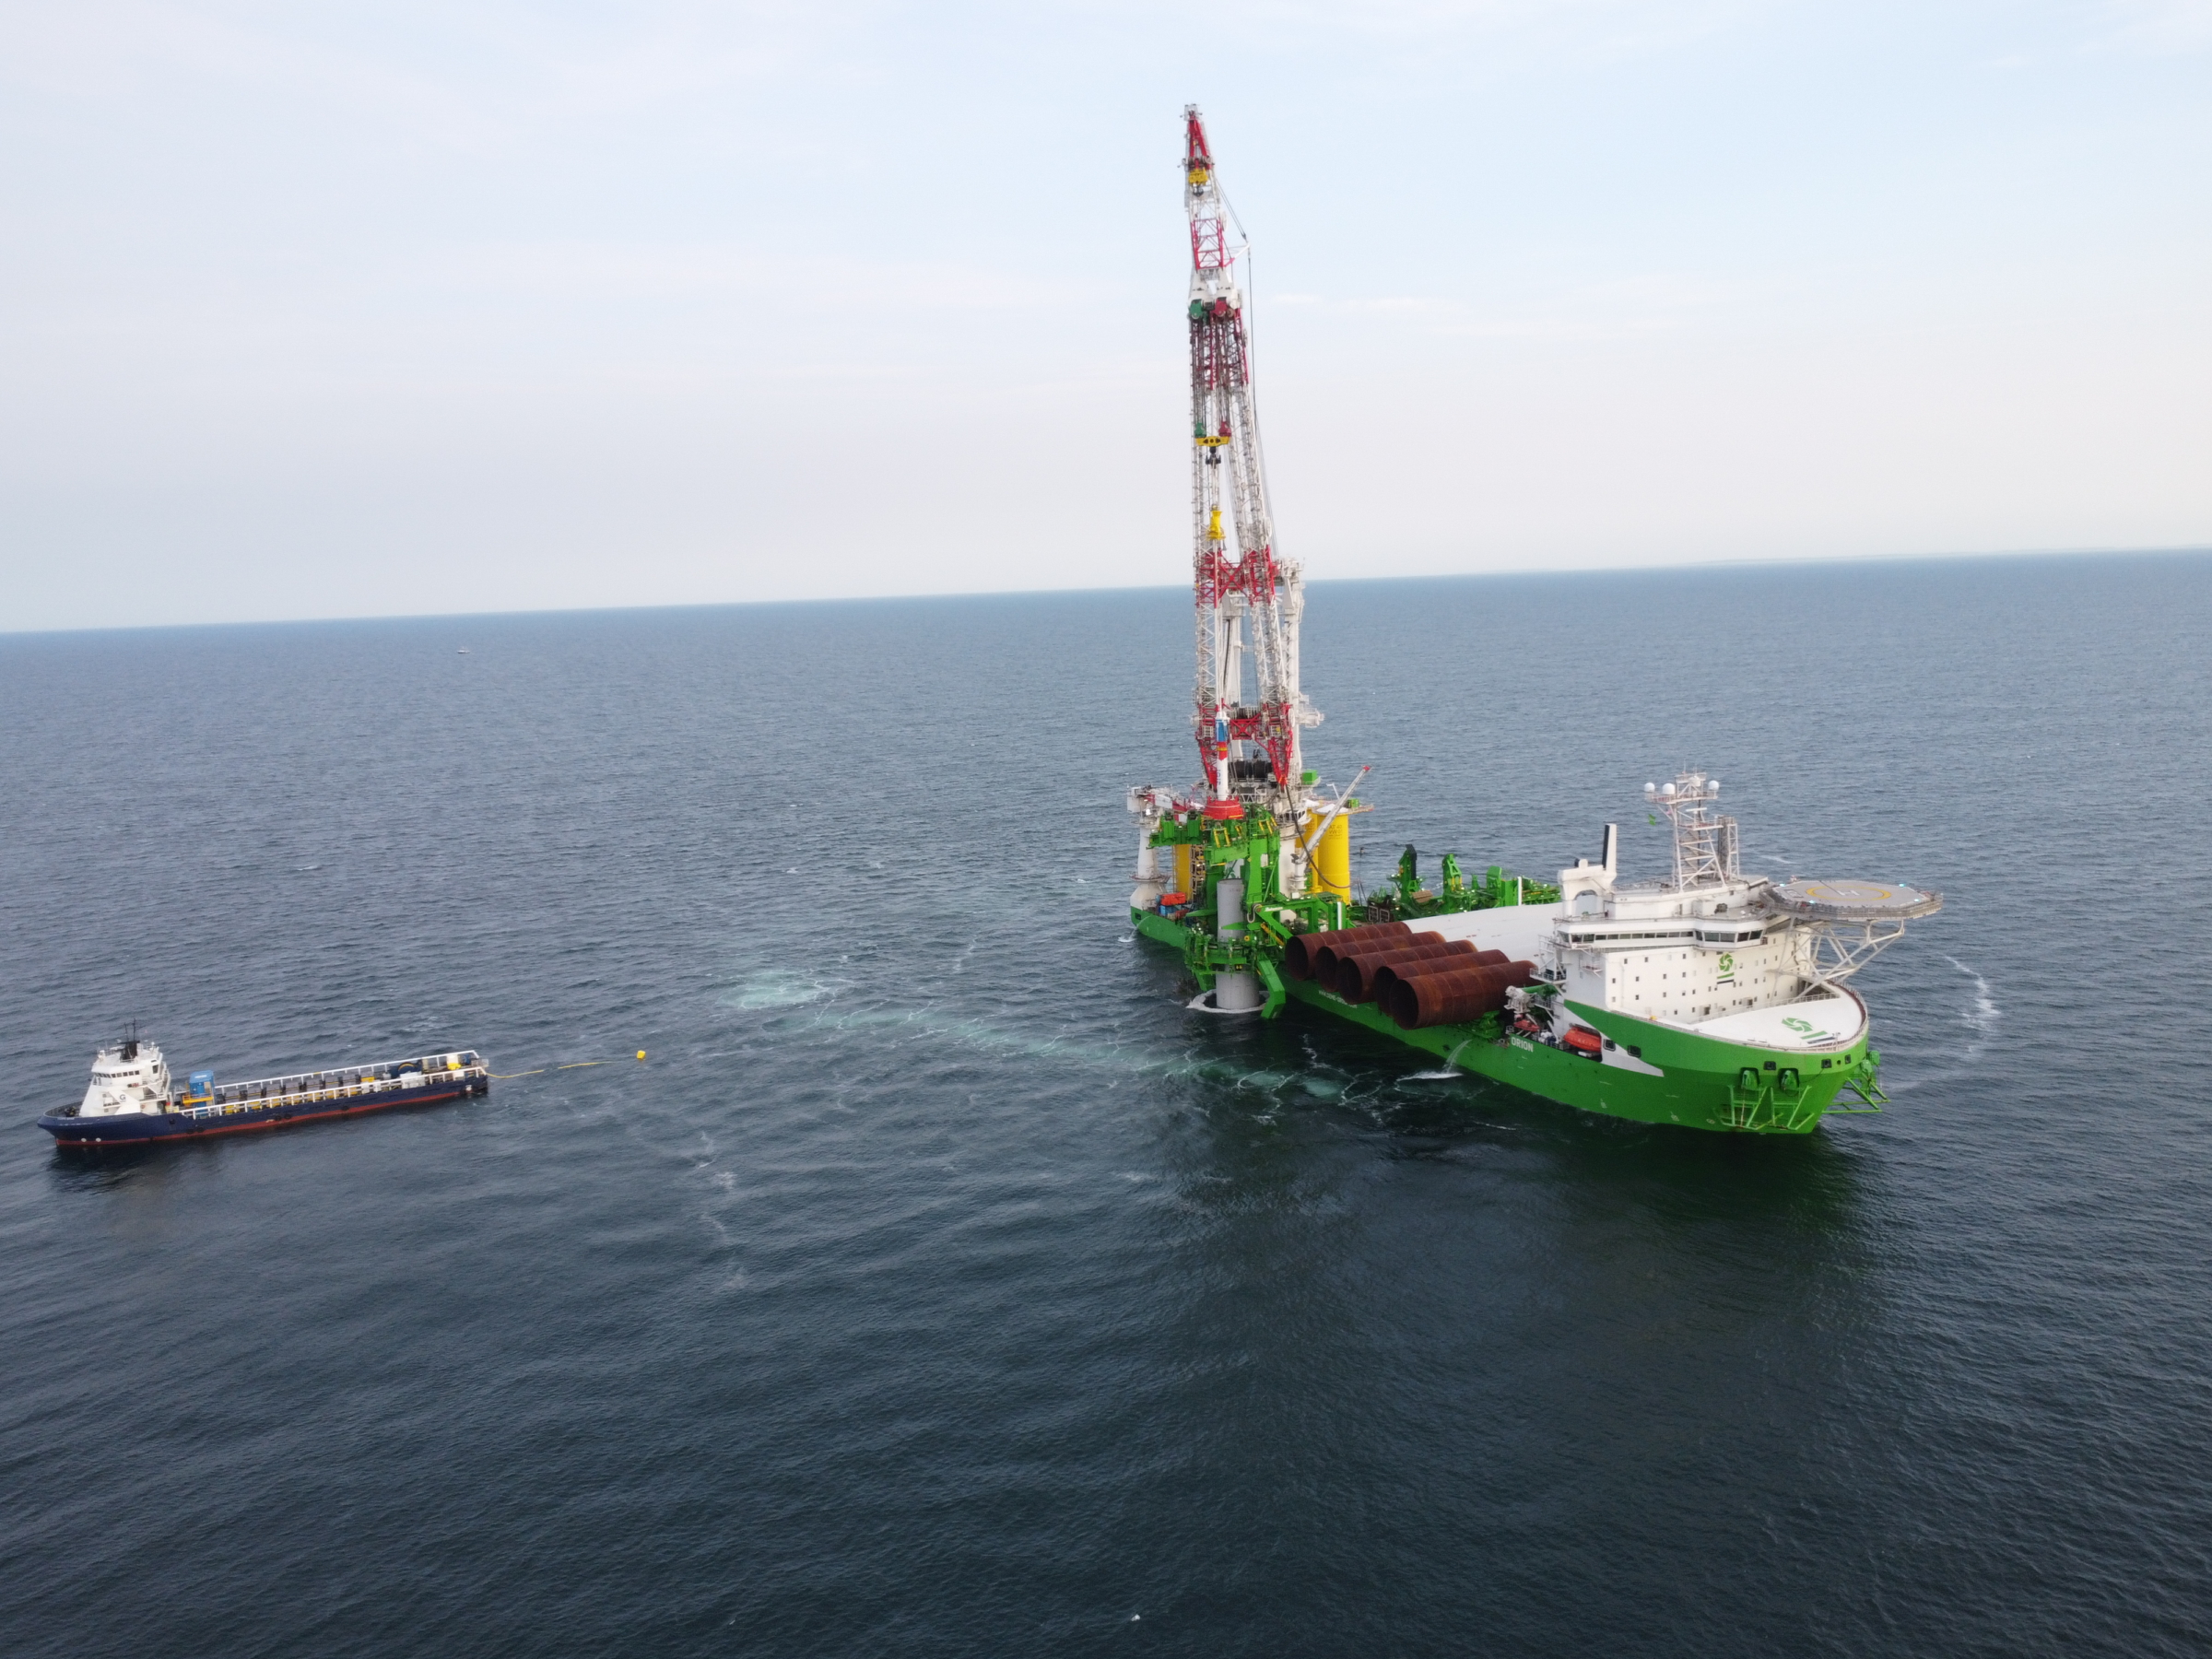 Offshore works kick off at Vineyard Wind 1 wind farm in US with installation of first foundation